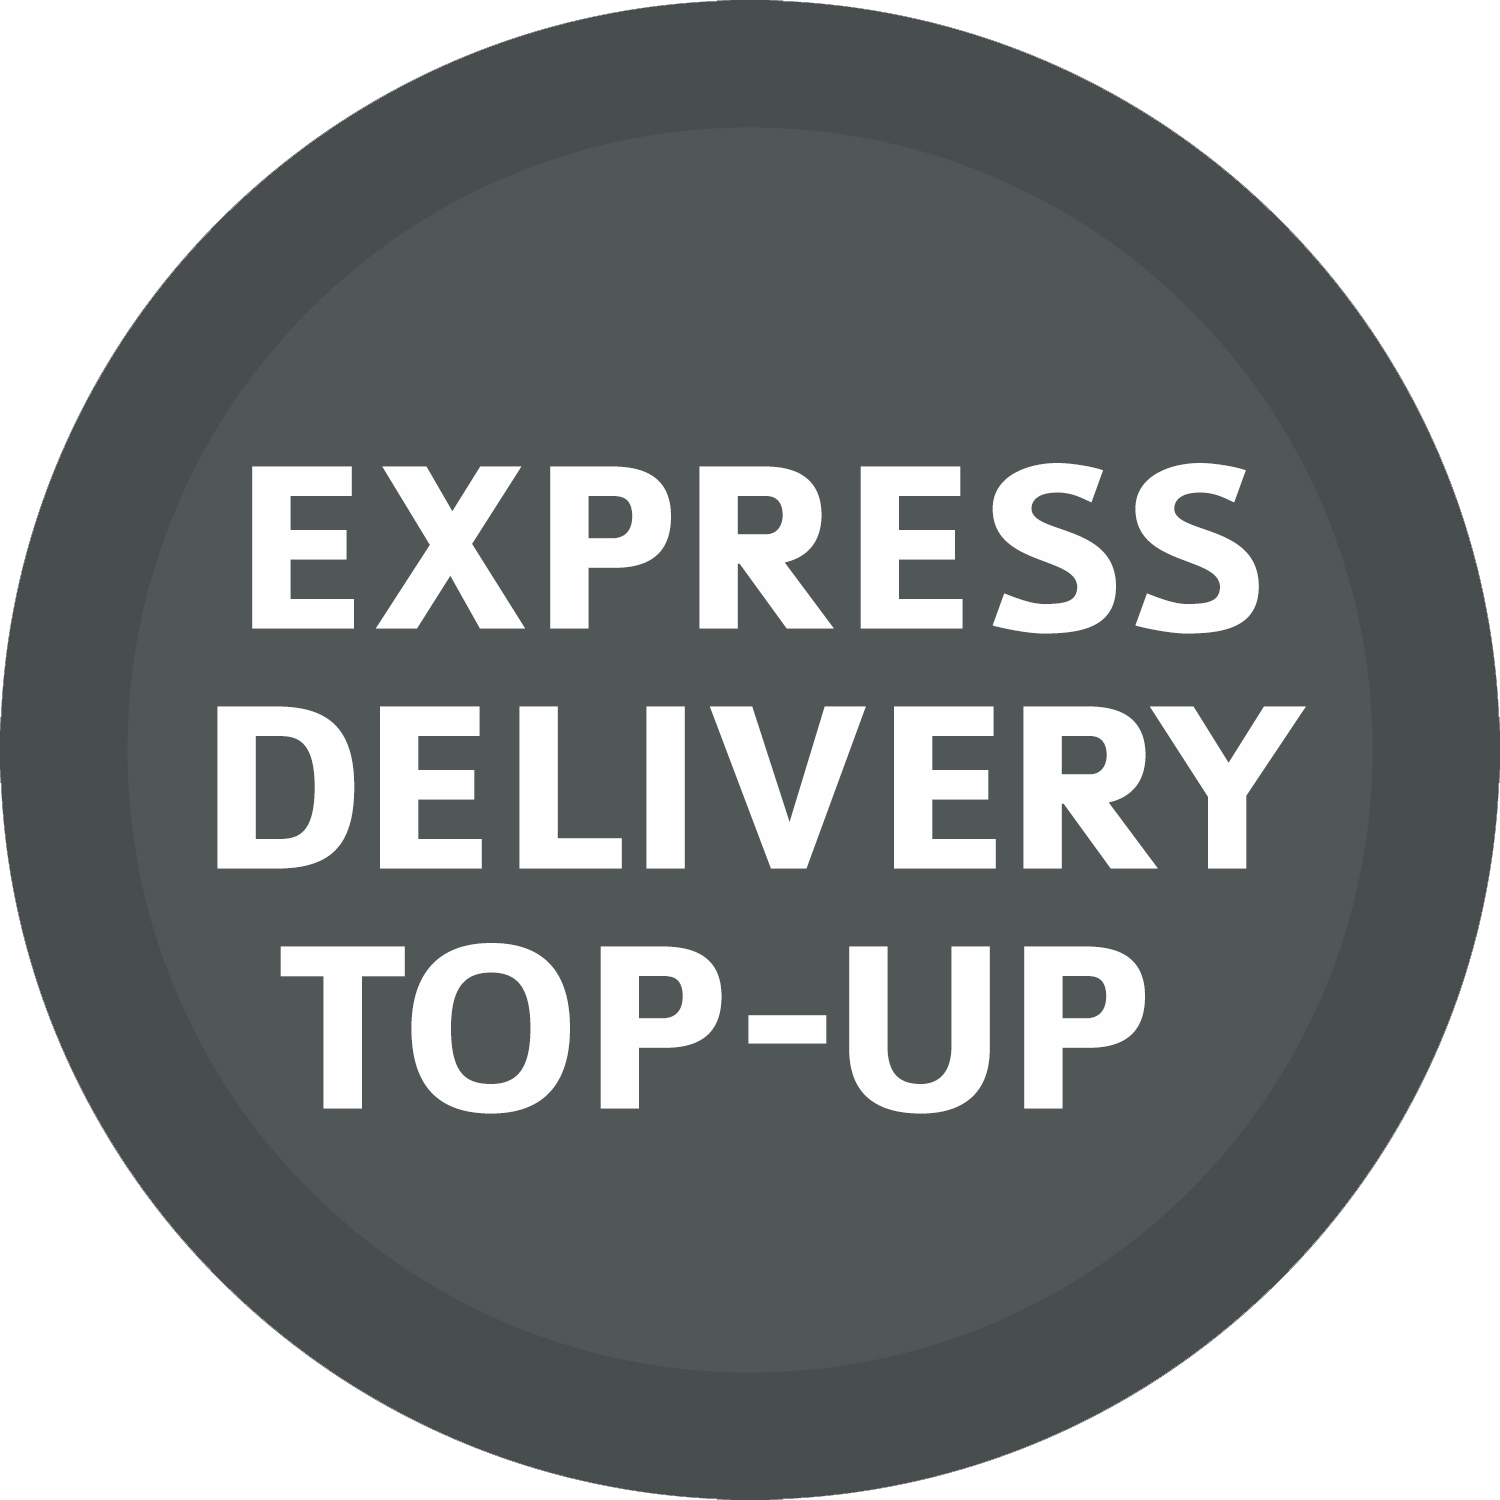 Top-up for Express Delivery